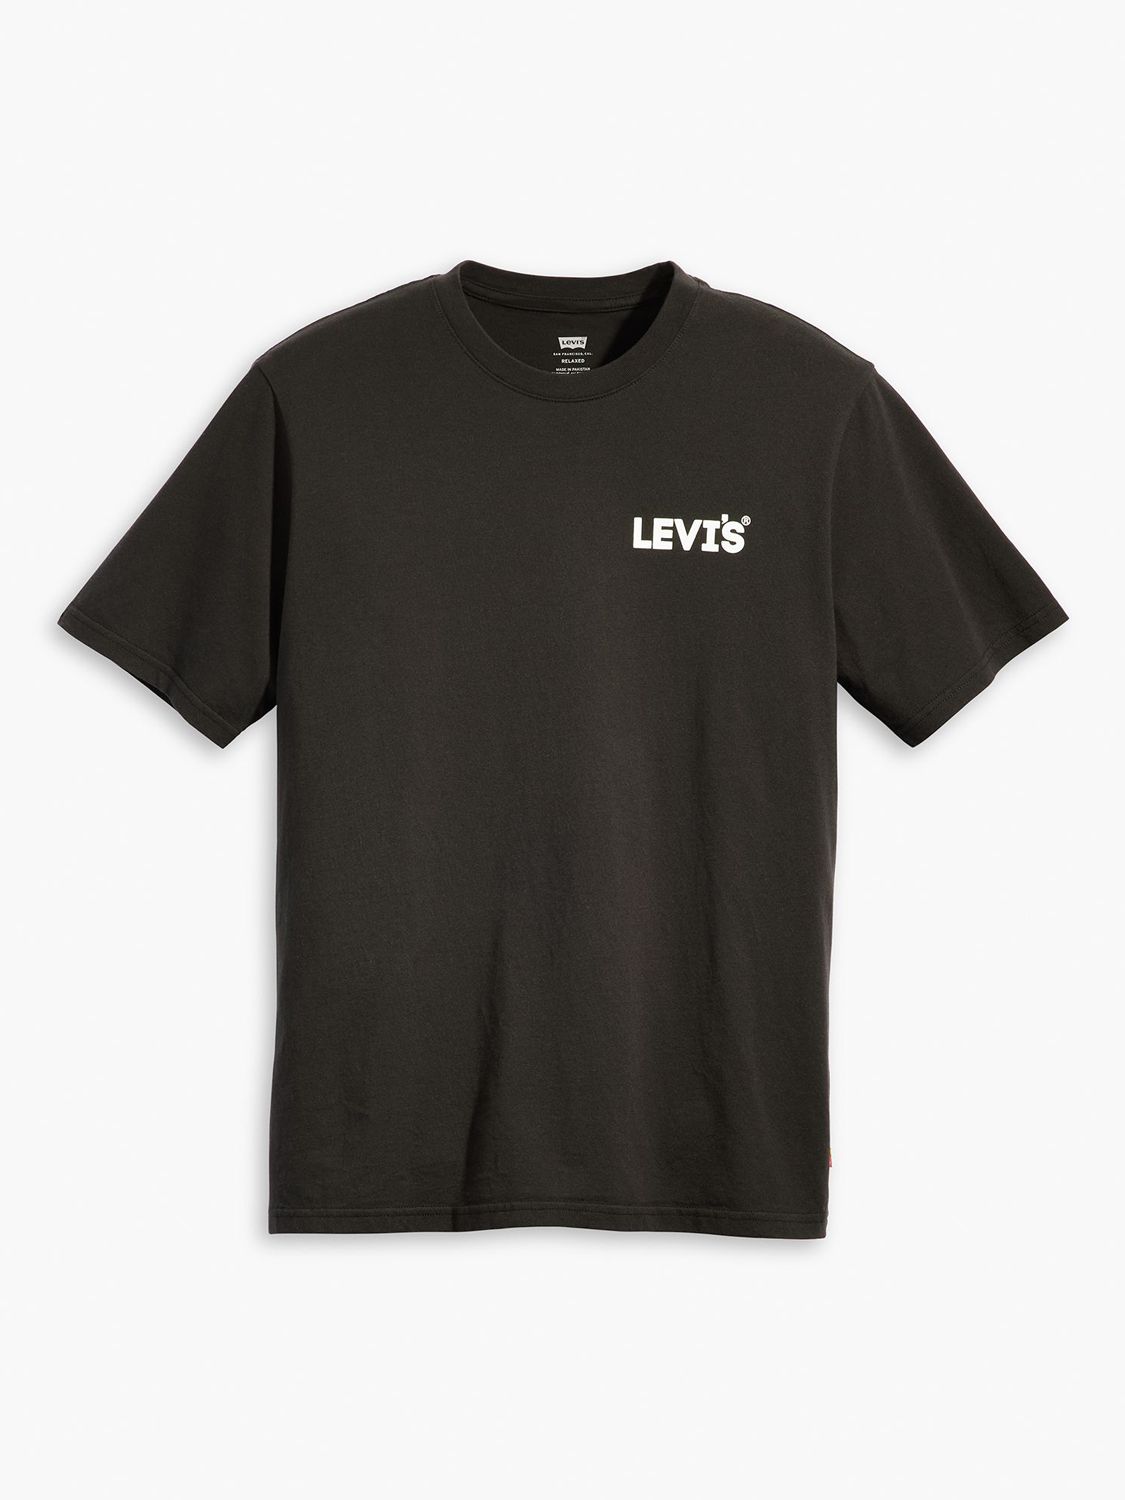 Levi's Relaxed Fit Short Sleeve Graphic T-Shirt, Caviar, XL